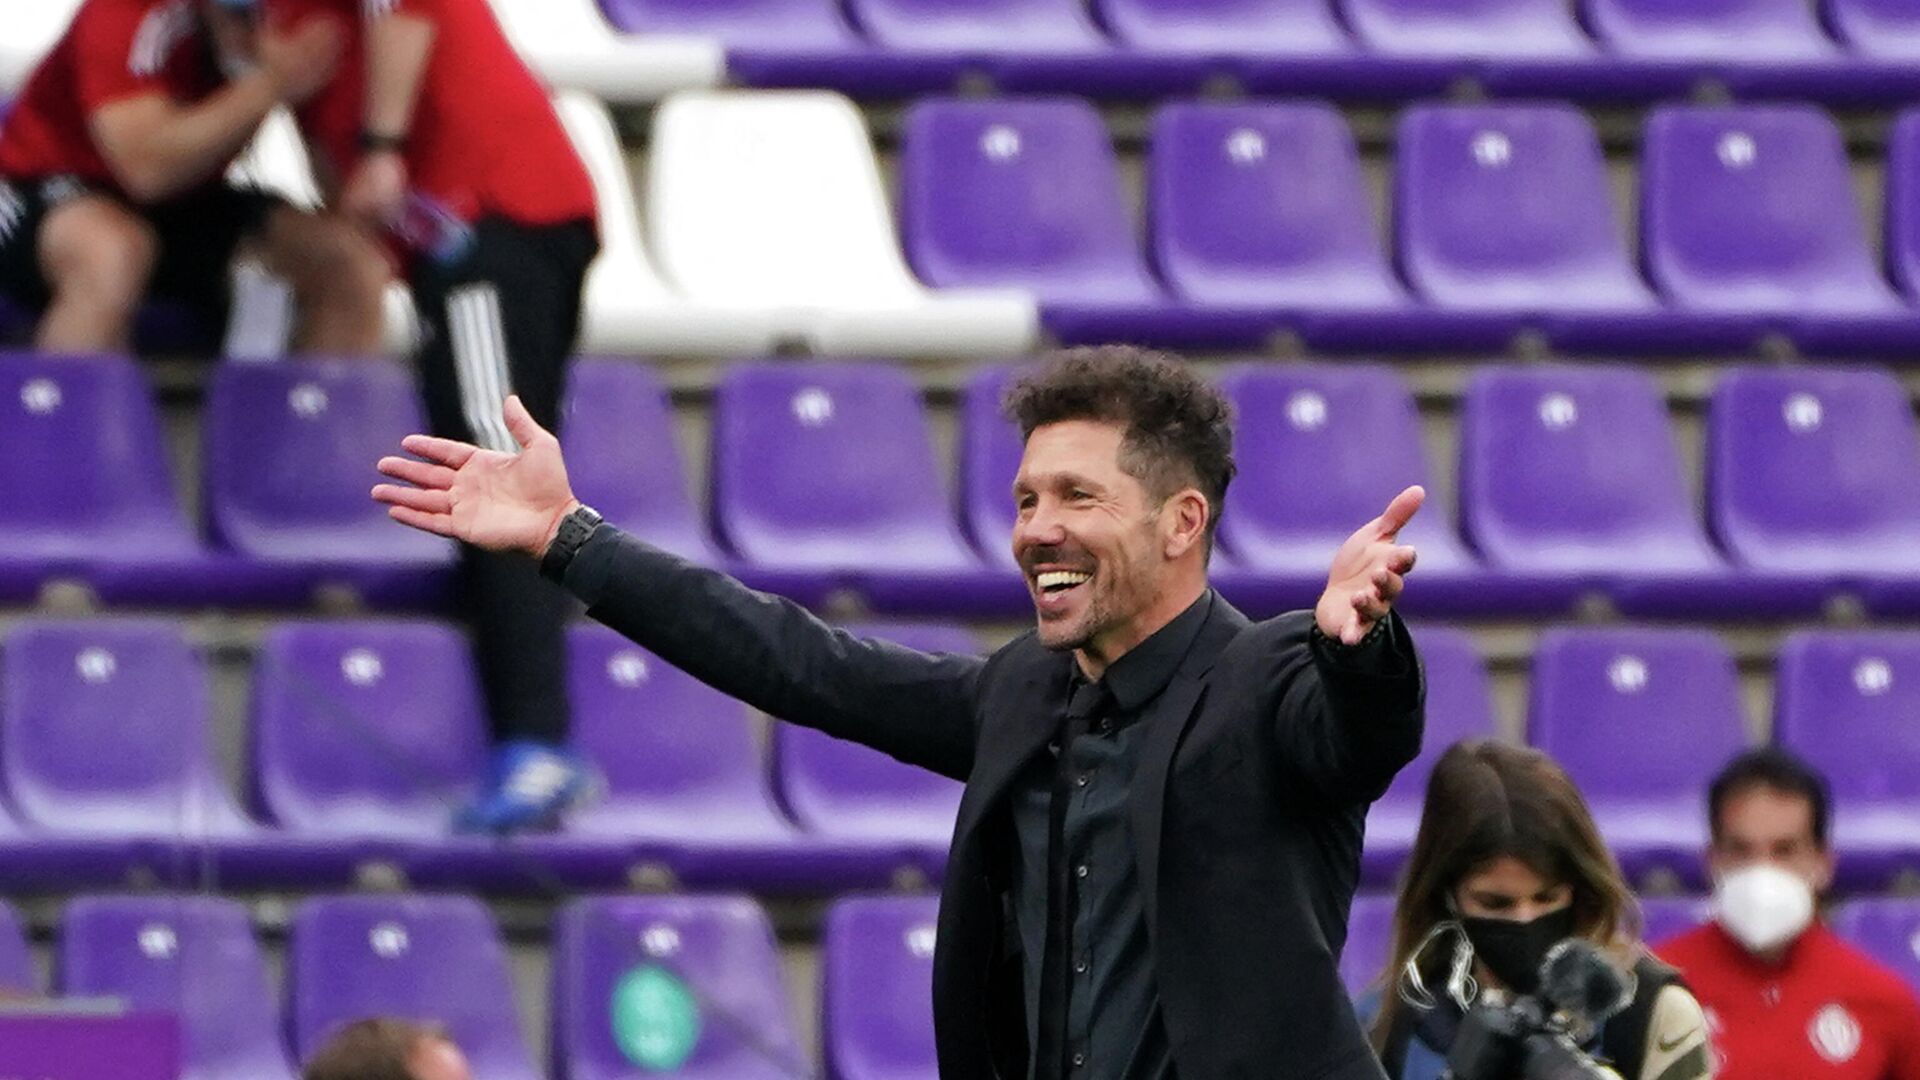 Atletico Madrid's Argentine coach Diego Simeone celebrates after winning the Spanish league football match against Real Valladolid FC and the Liga Championship title at the Jose Zorilla stadium in Valladolid on May 22, 2021. (Photo by CESAR MANSO / AFP) - РИА Новости, 1920, 23.05.2021